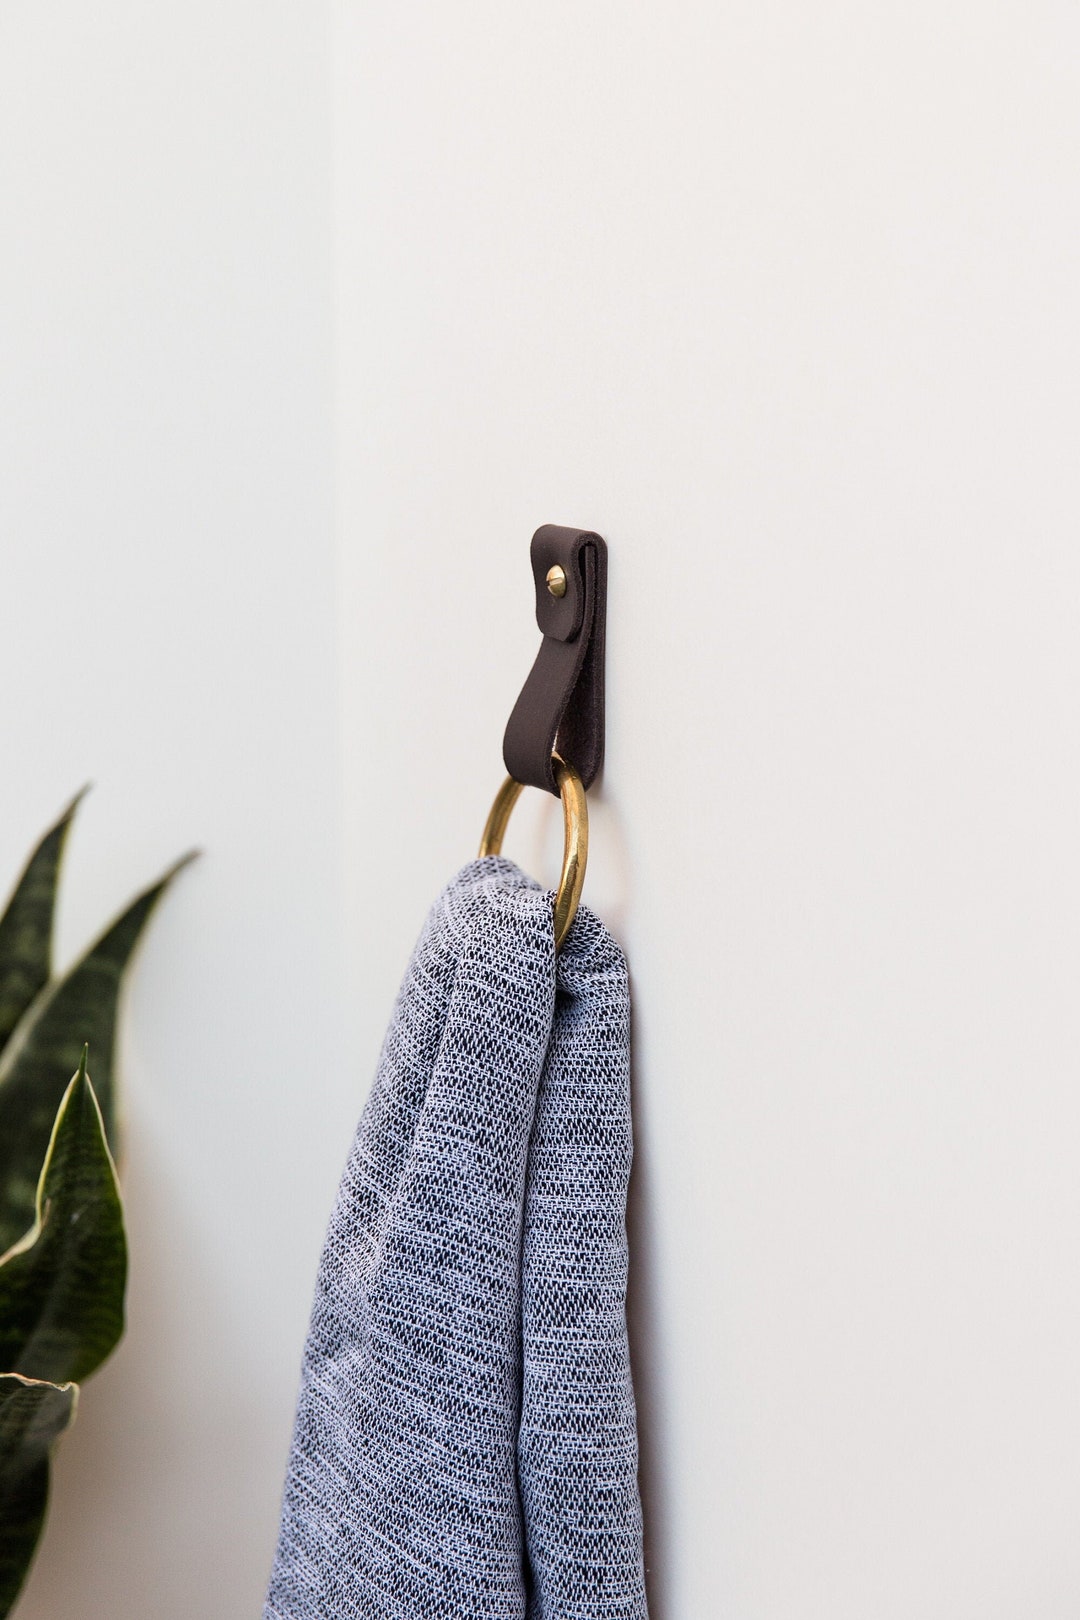 Small Minimalist Leather Strap Hanger for Bath Towel Holder - Etsy